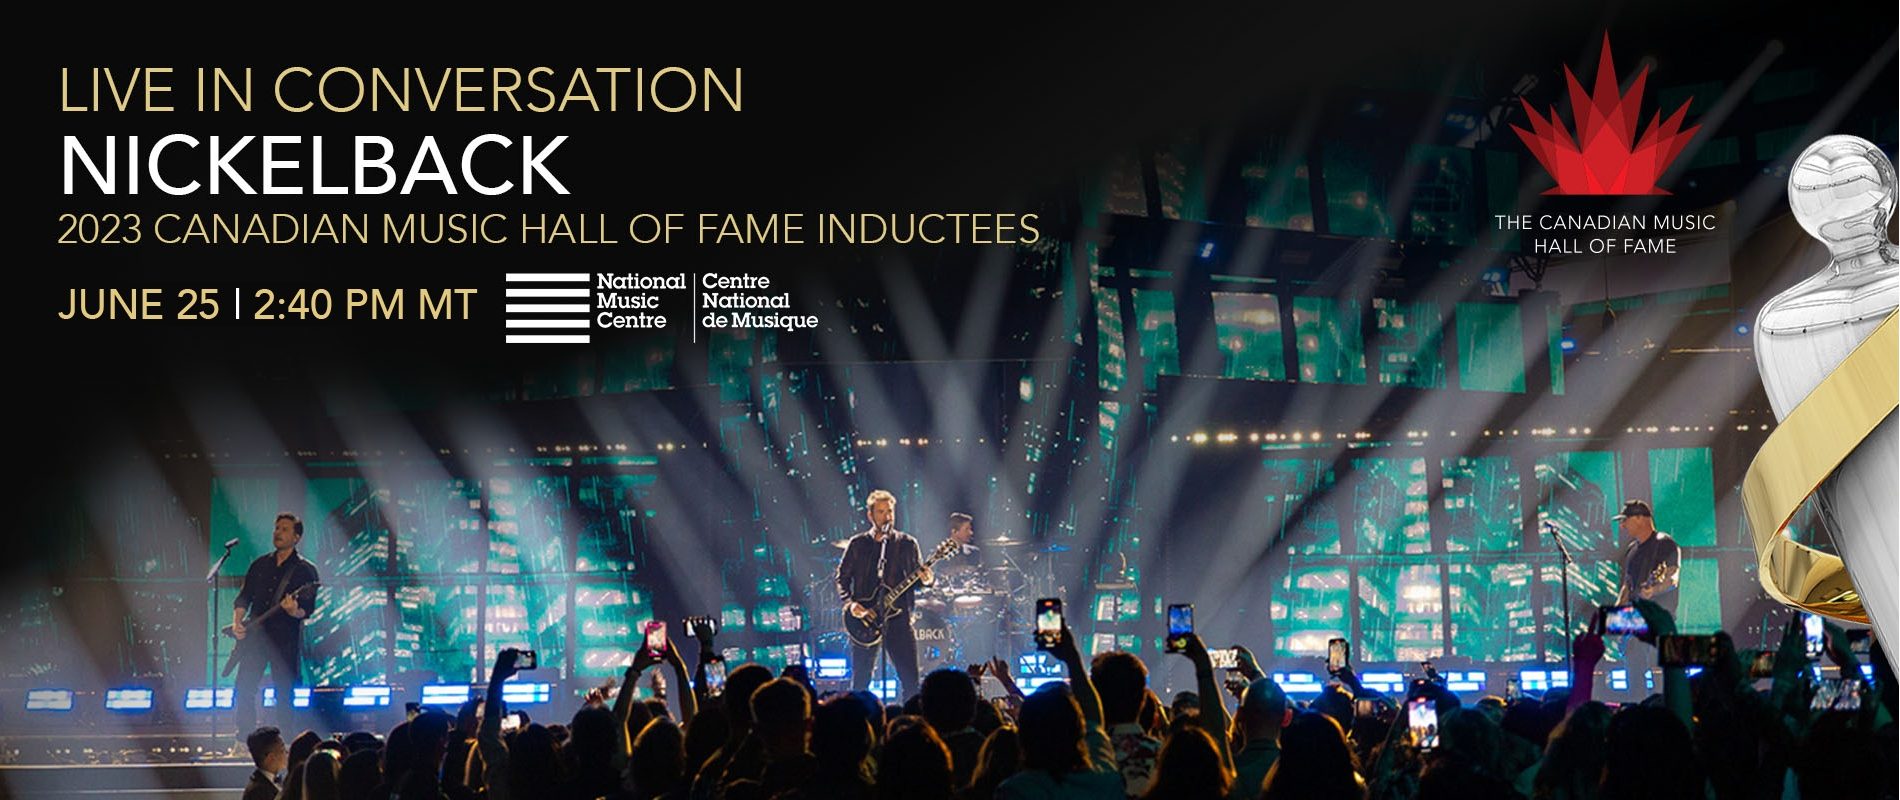 National Music Centre and CARAS to Present Live Conversation with Nickelback on June 25